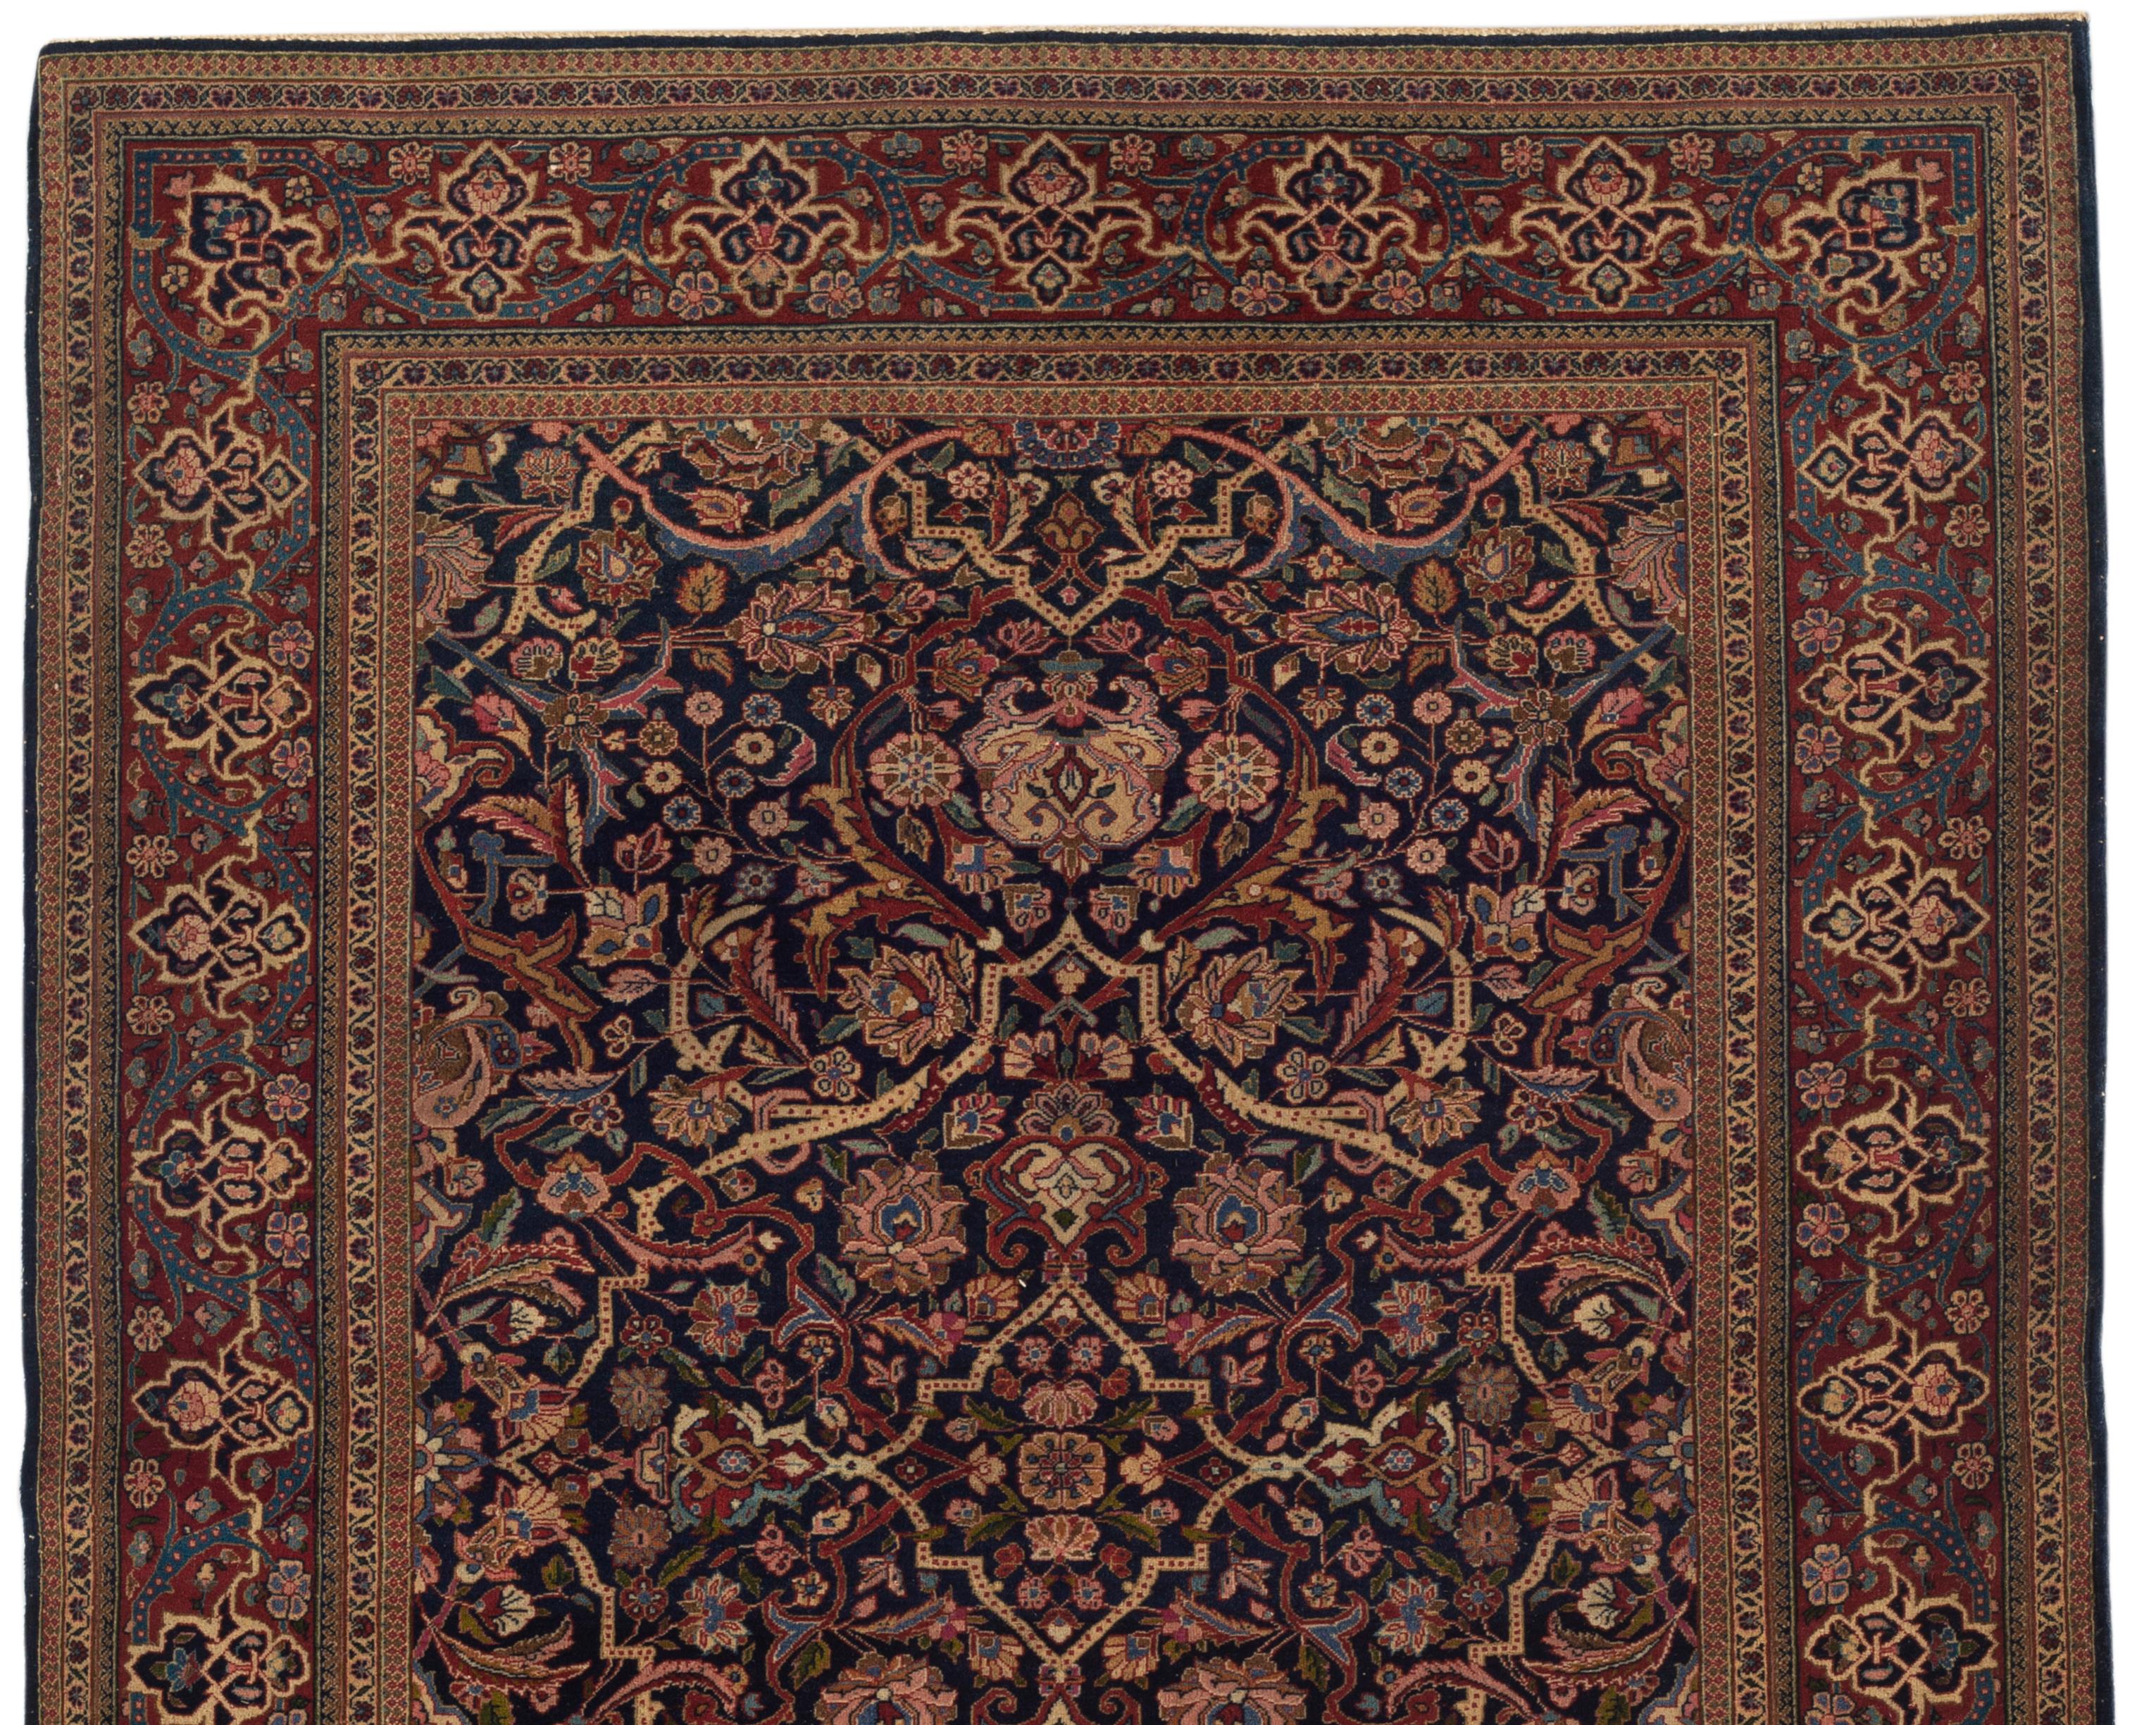 Antique Persian Kashan Navy / Red Rug, circa 1900. Situated on the caravan route to India in central Persia is the town of Kashan famed as one of the top quality production areas. They have been producing and exporting carpets of the highest